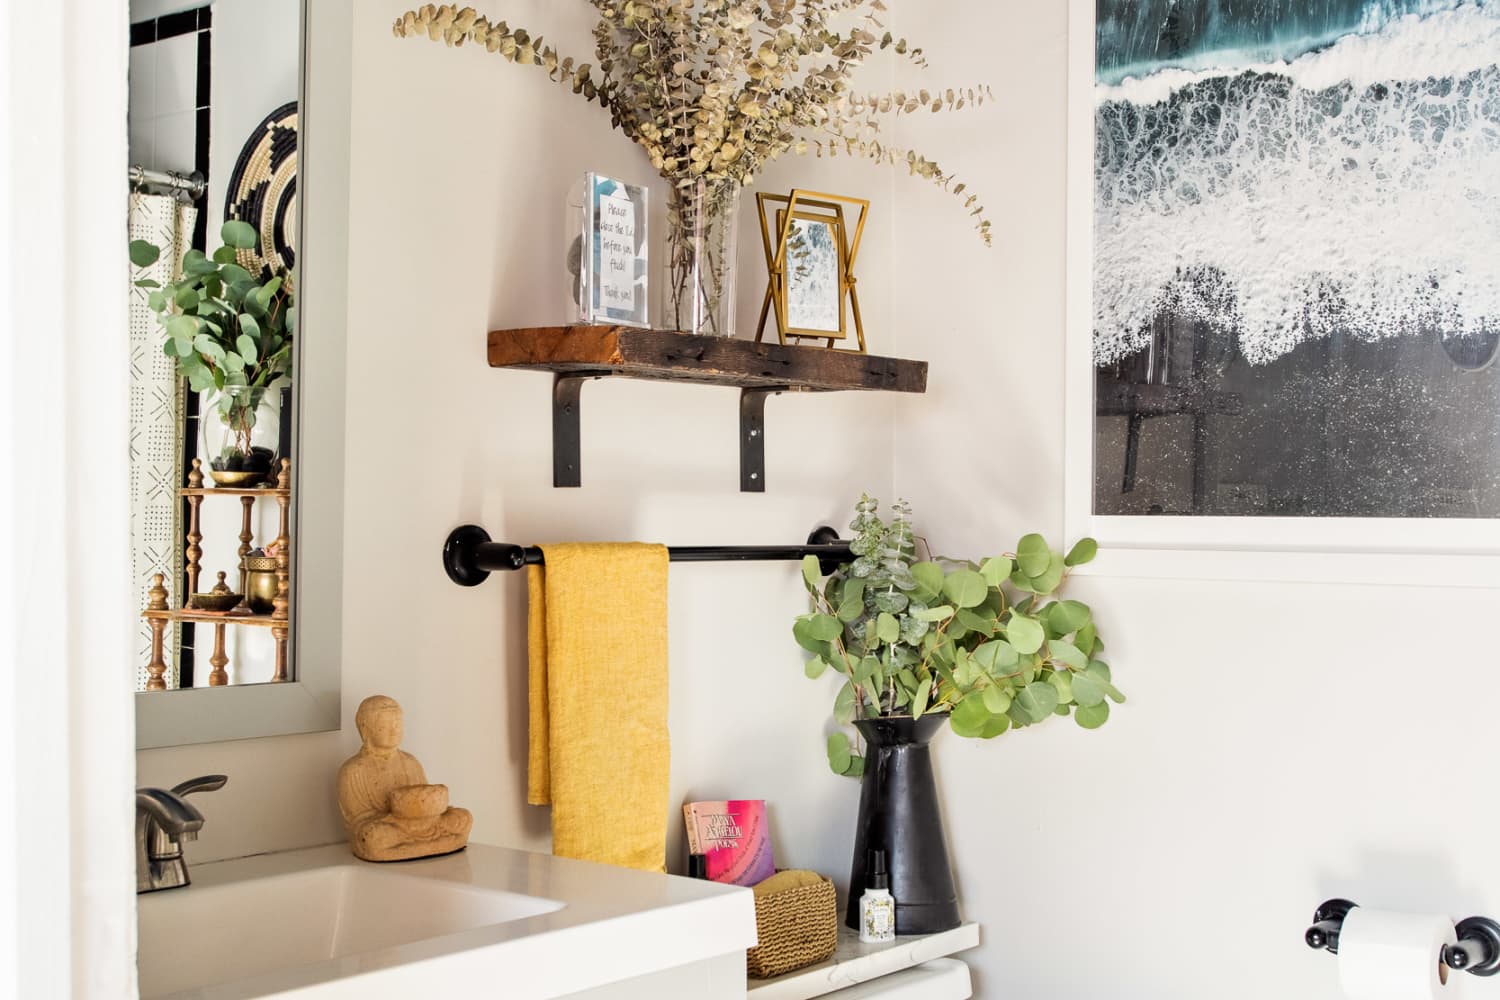 13 Bathroom Decor Things To Consider Adding - Frame It Easy